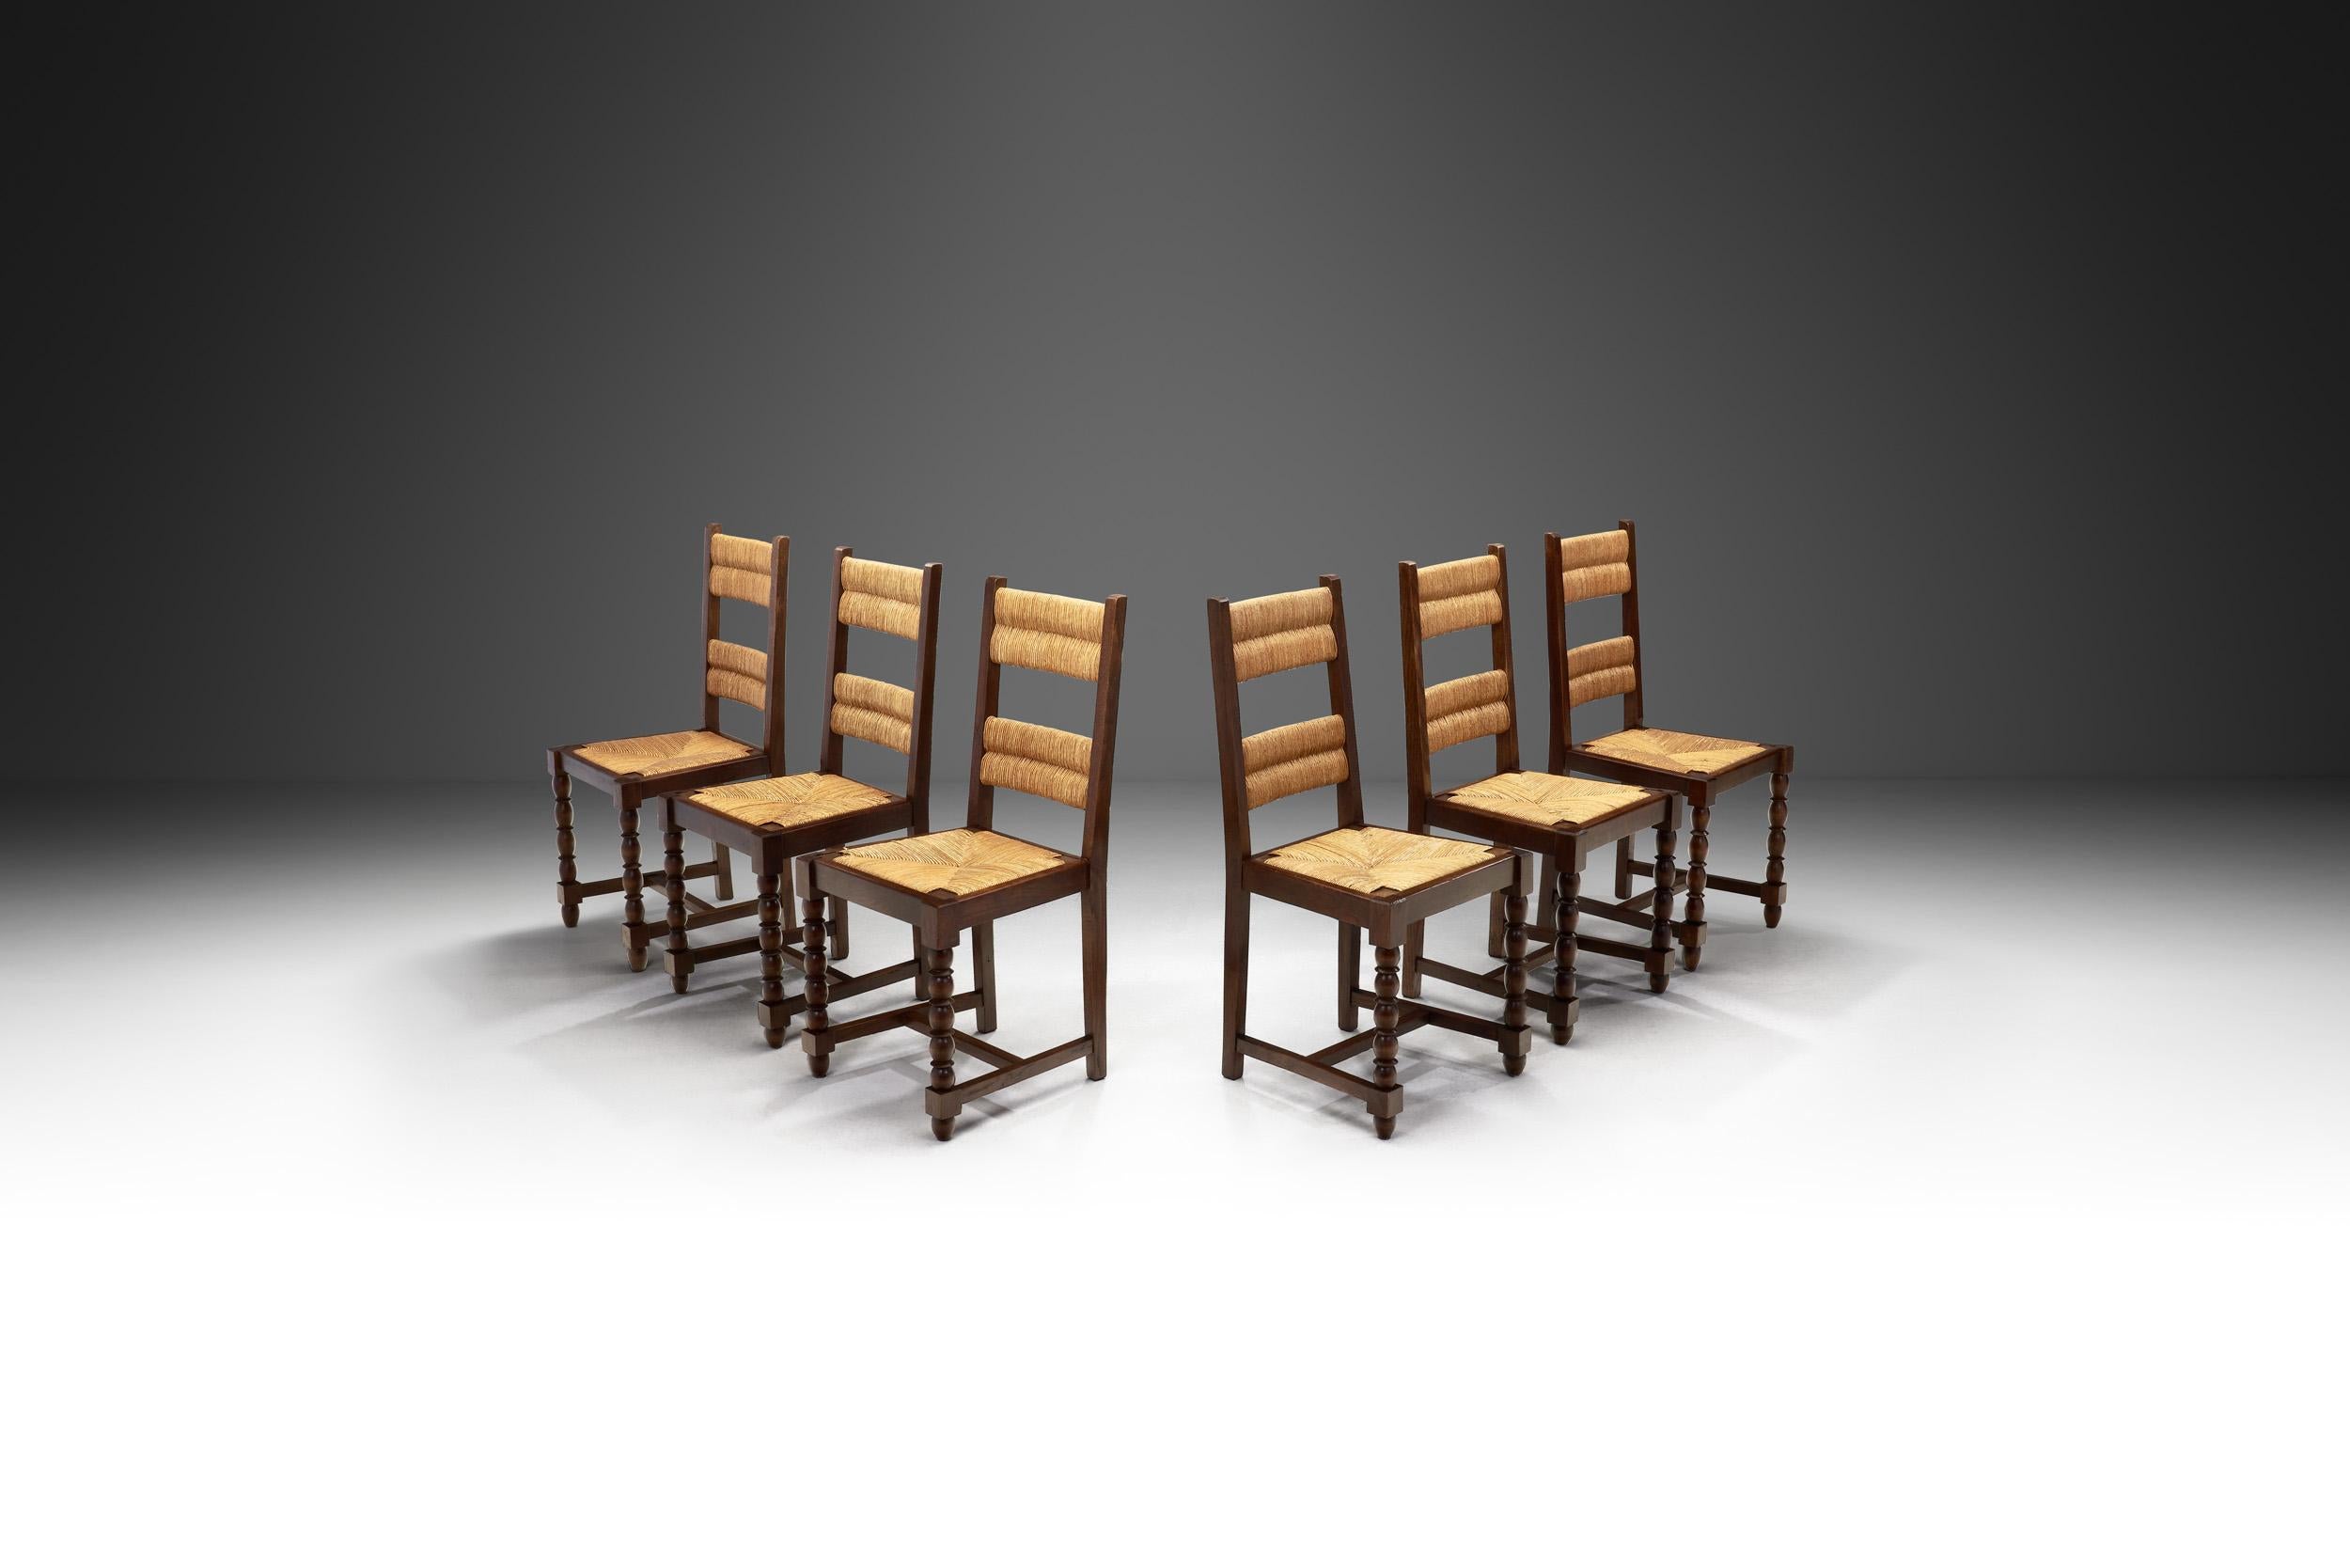 This charming set of six dining chairs was born from a desire to create a design that was comfortable, organic, and cosy in its simplicity. The design incorporates subtle, yet stunning decorative elements as the woven cane panels find architectural